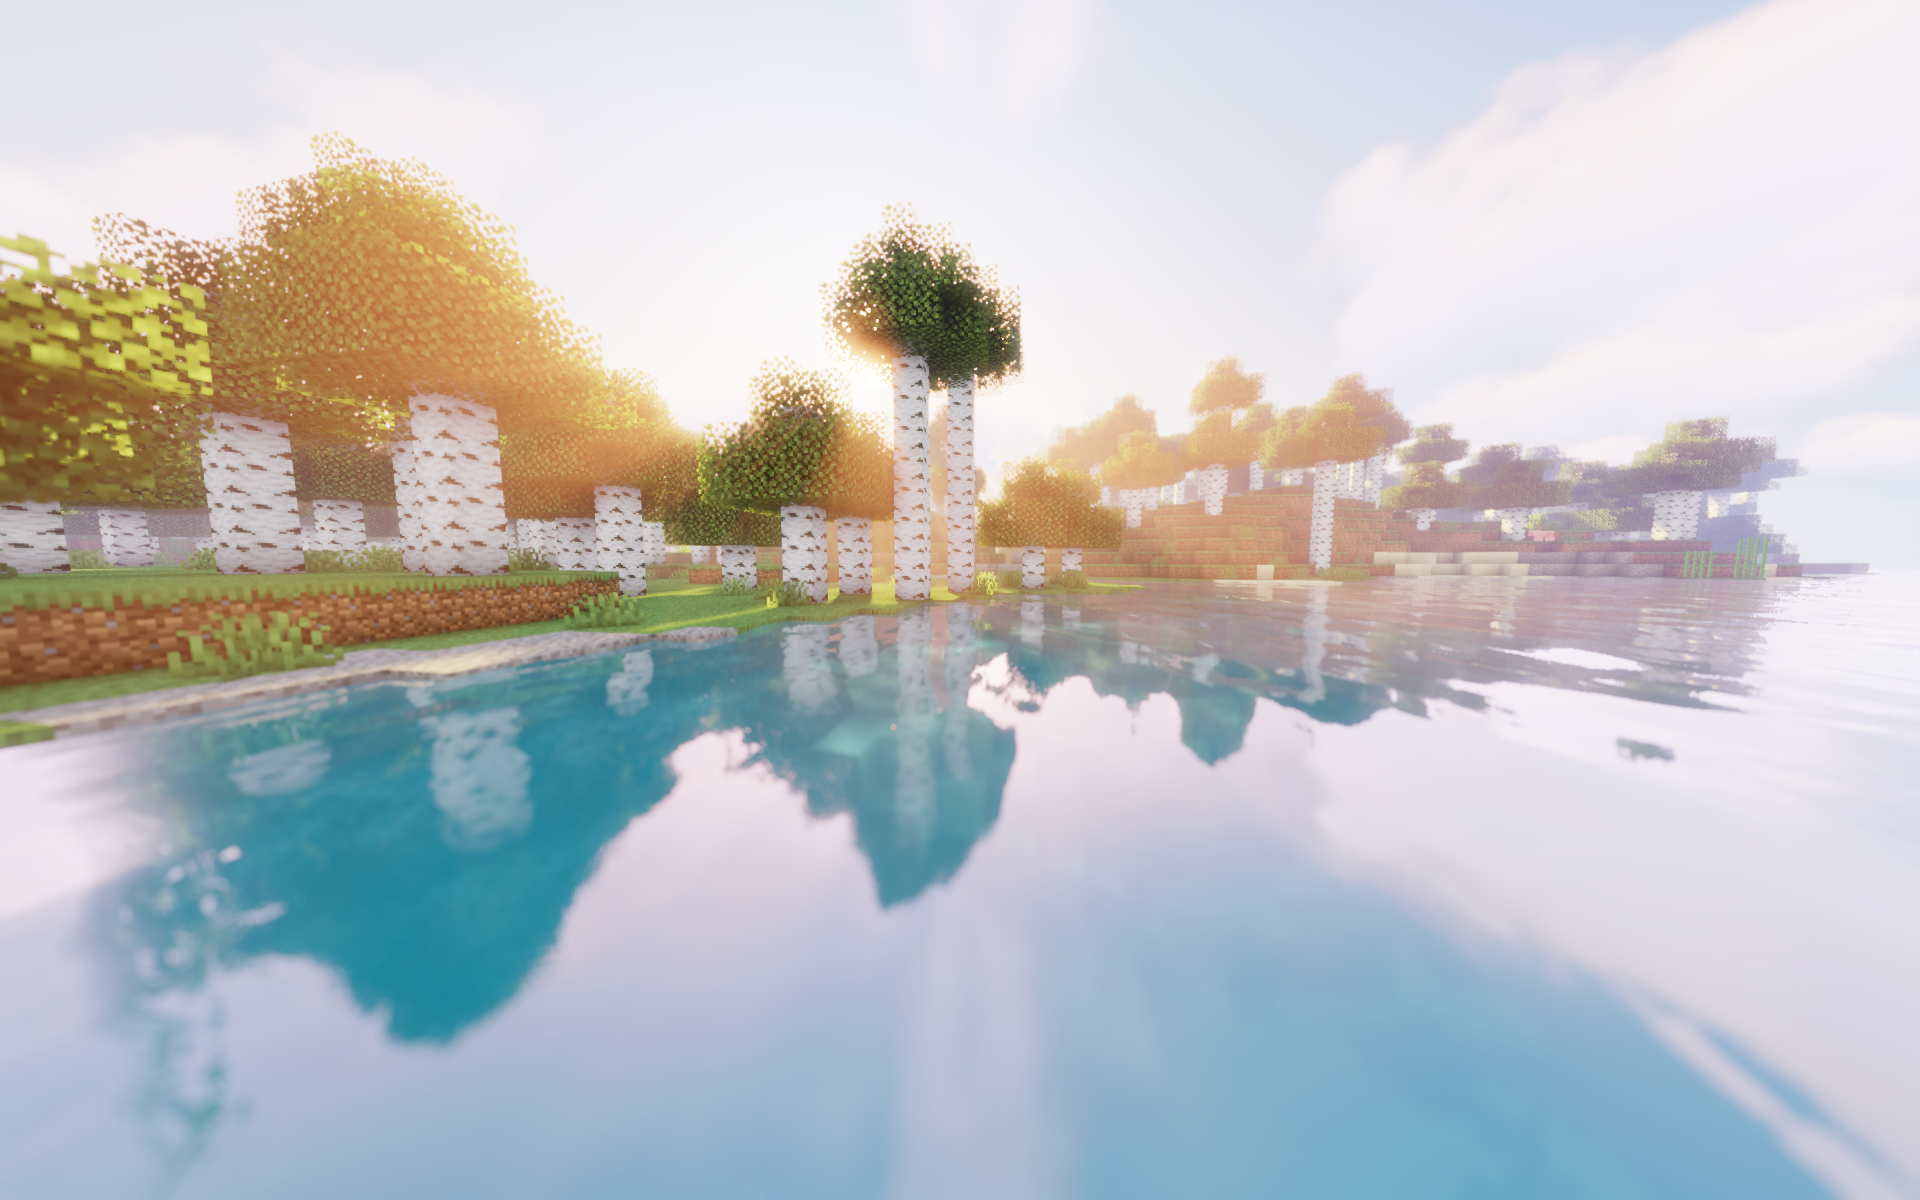 Minecraft Shaders Video Games CGi Video Game Art Cube Water Trees Sky Clouds Nature Reflection 1920x1200